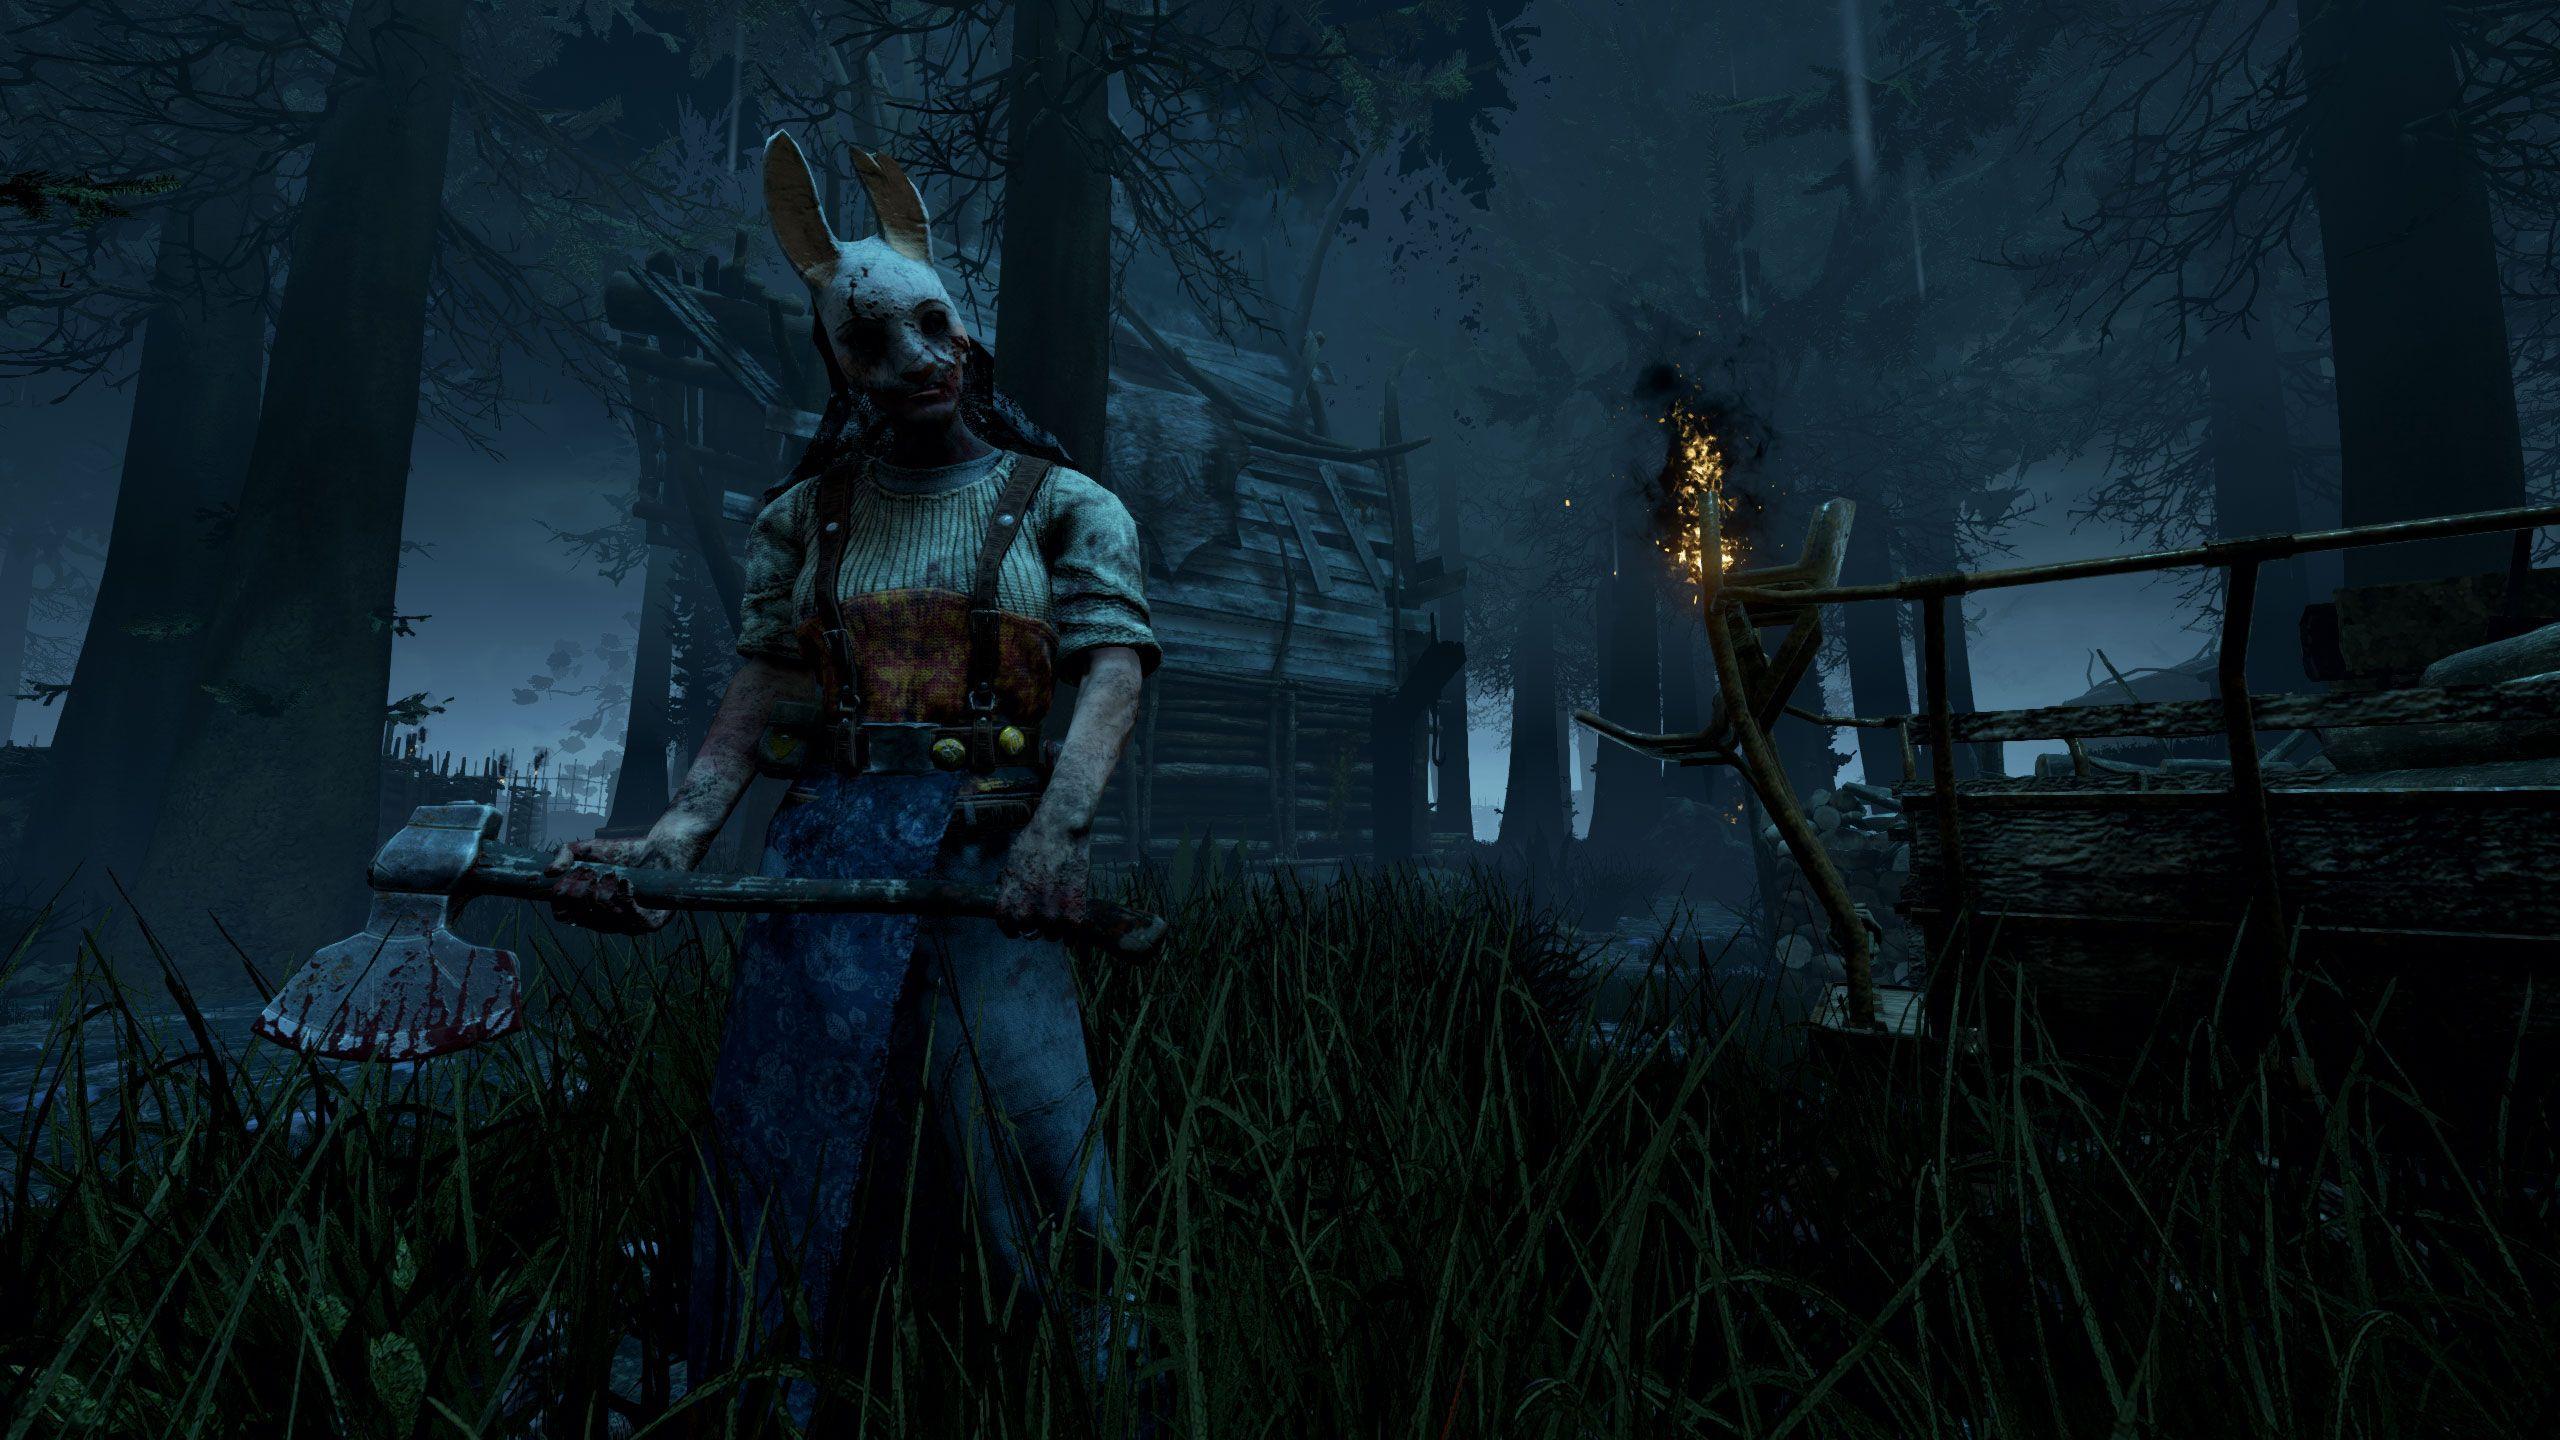 Dead By Daylight” unleashes The Huntress in new chapter, “A